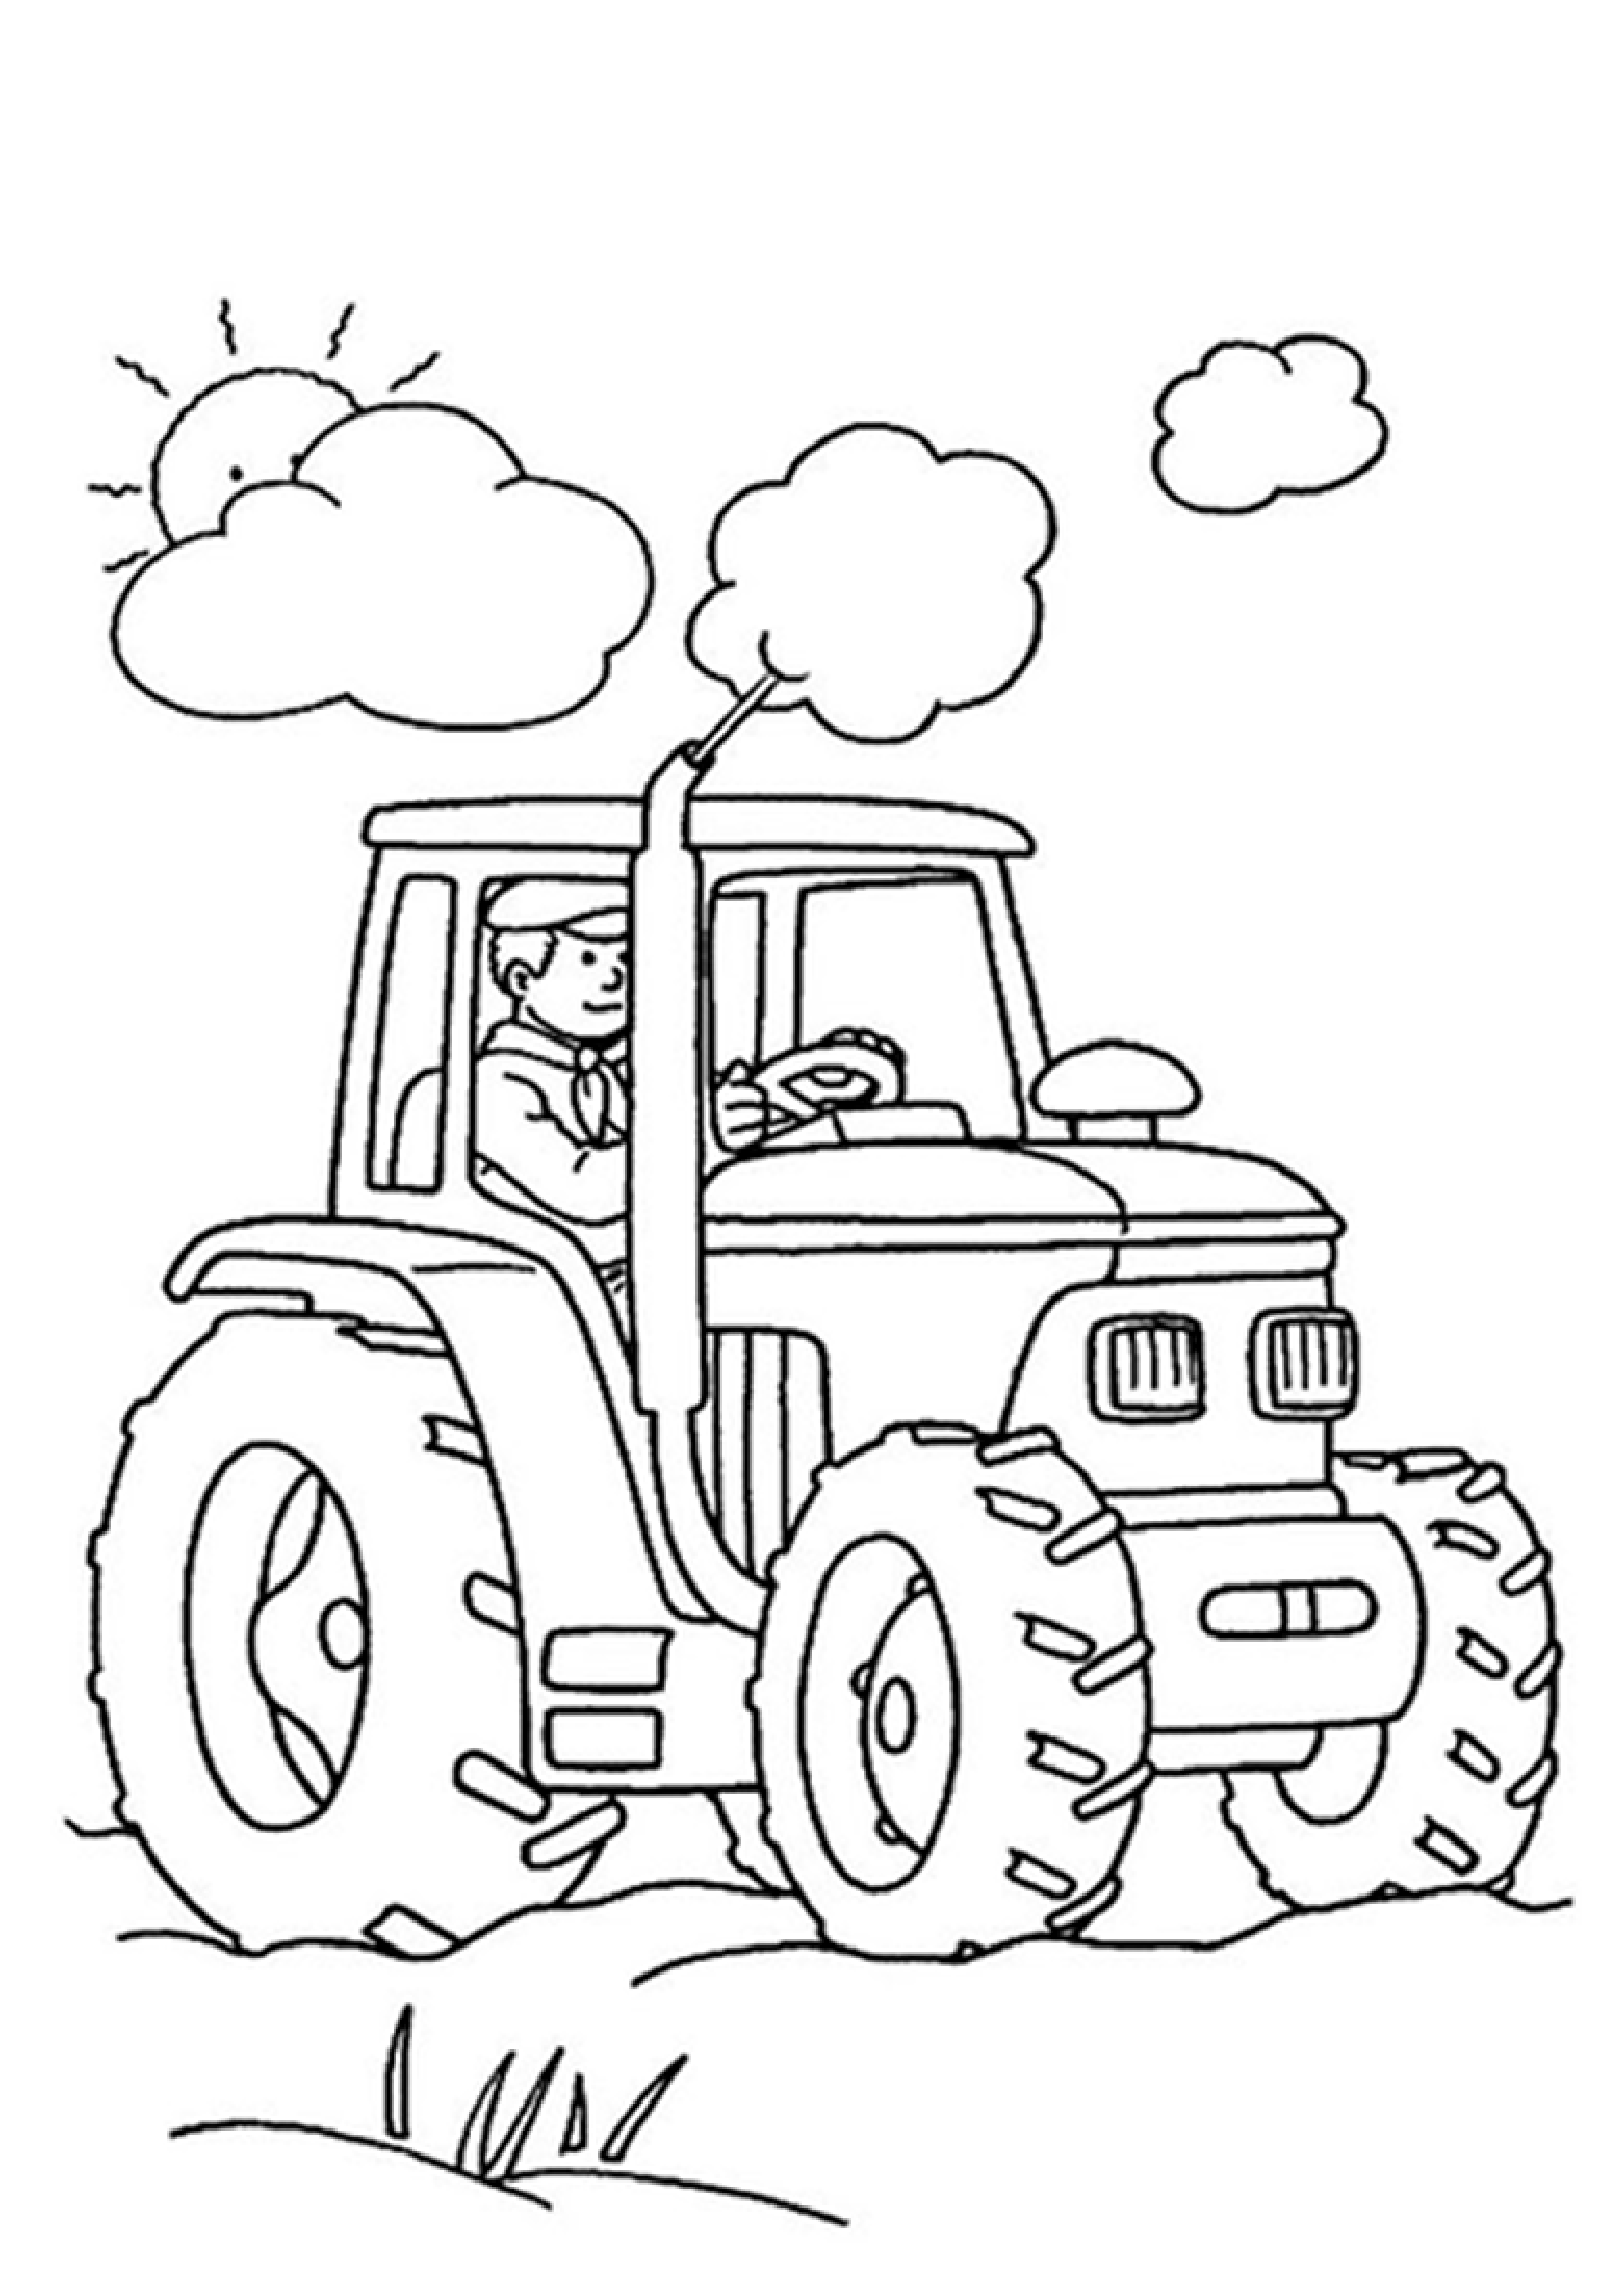 tractor coloring sheet free printable tractor coloring pages for kids cool2bkids sheet coloring tractor 